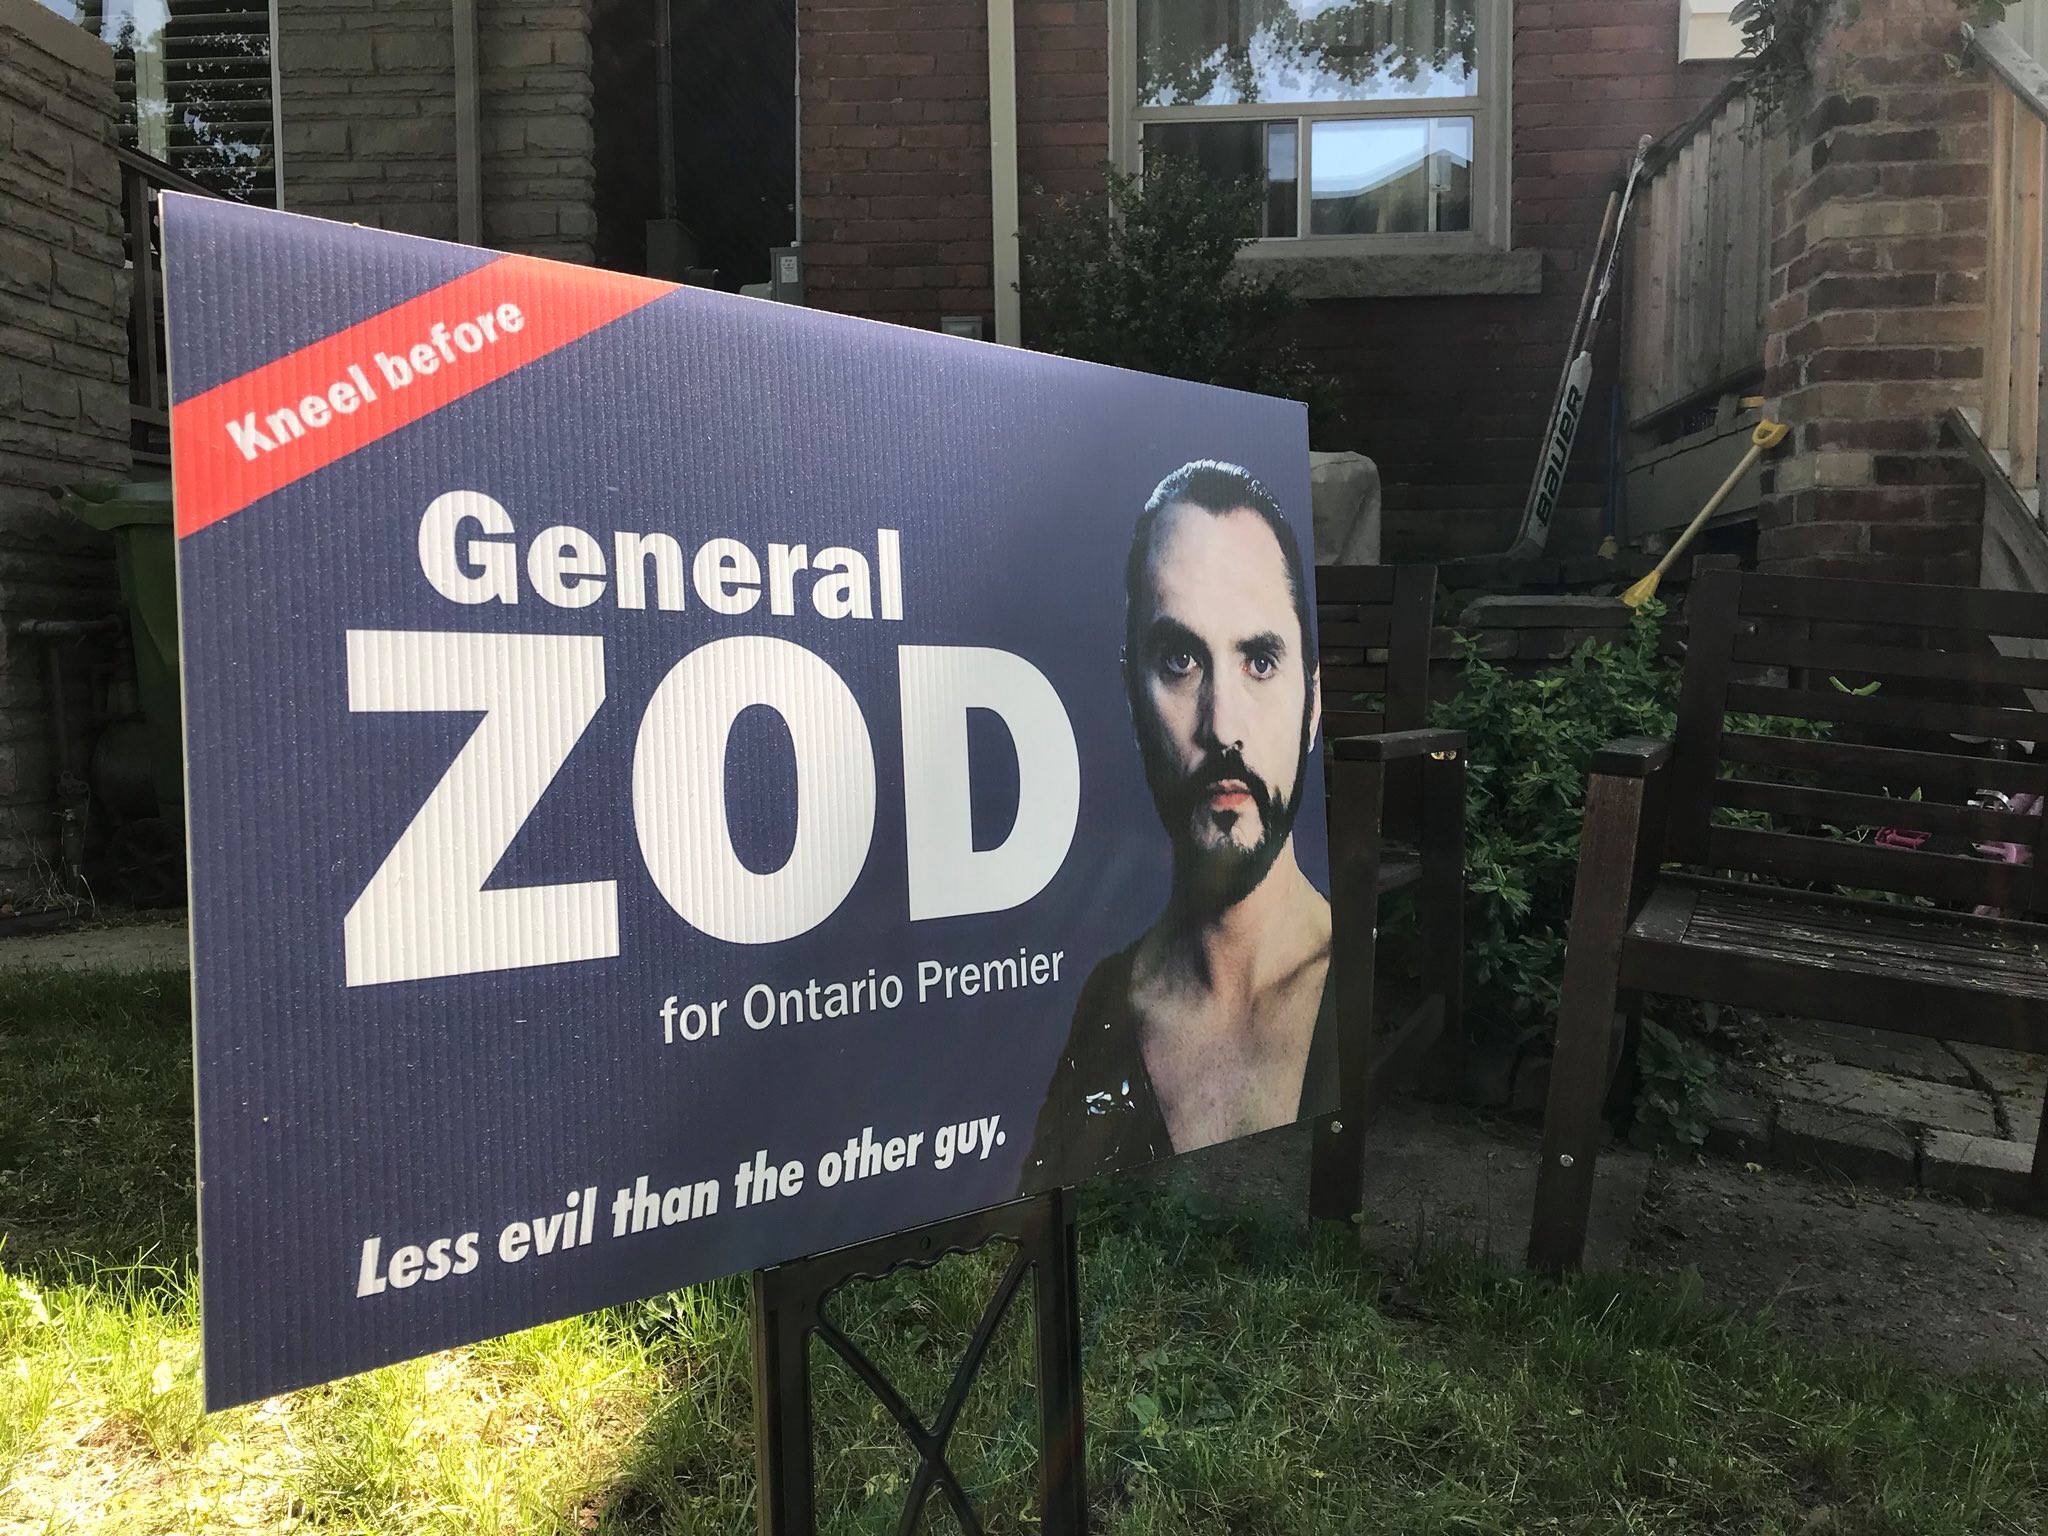 general zod for ontario premier - Kneel before General Zod for Ontario Premier Less evil than the other guy.